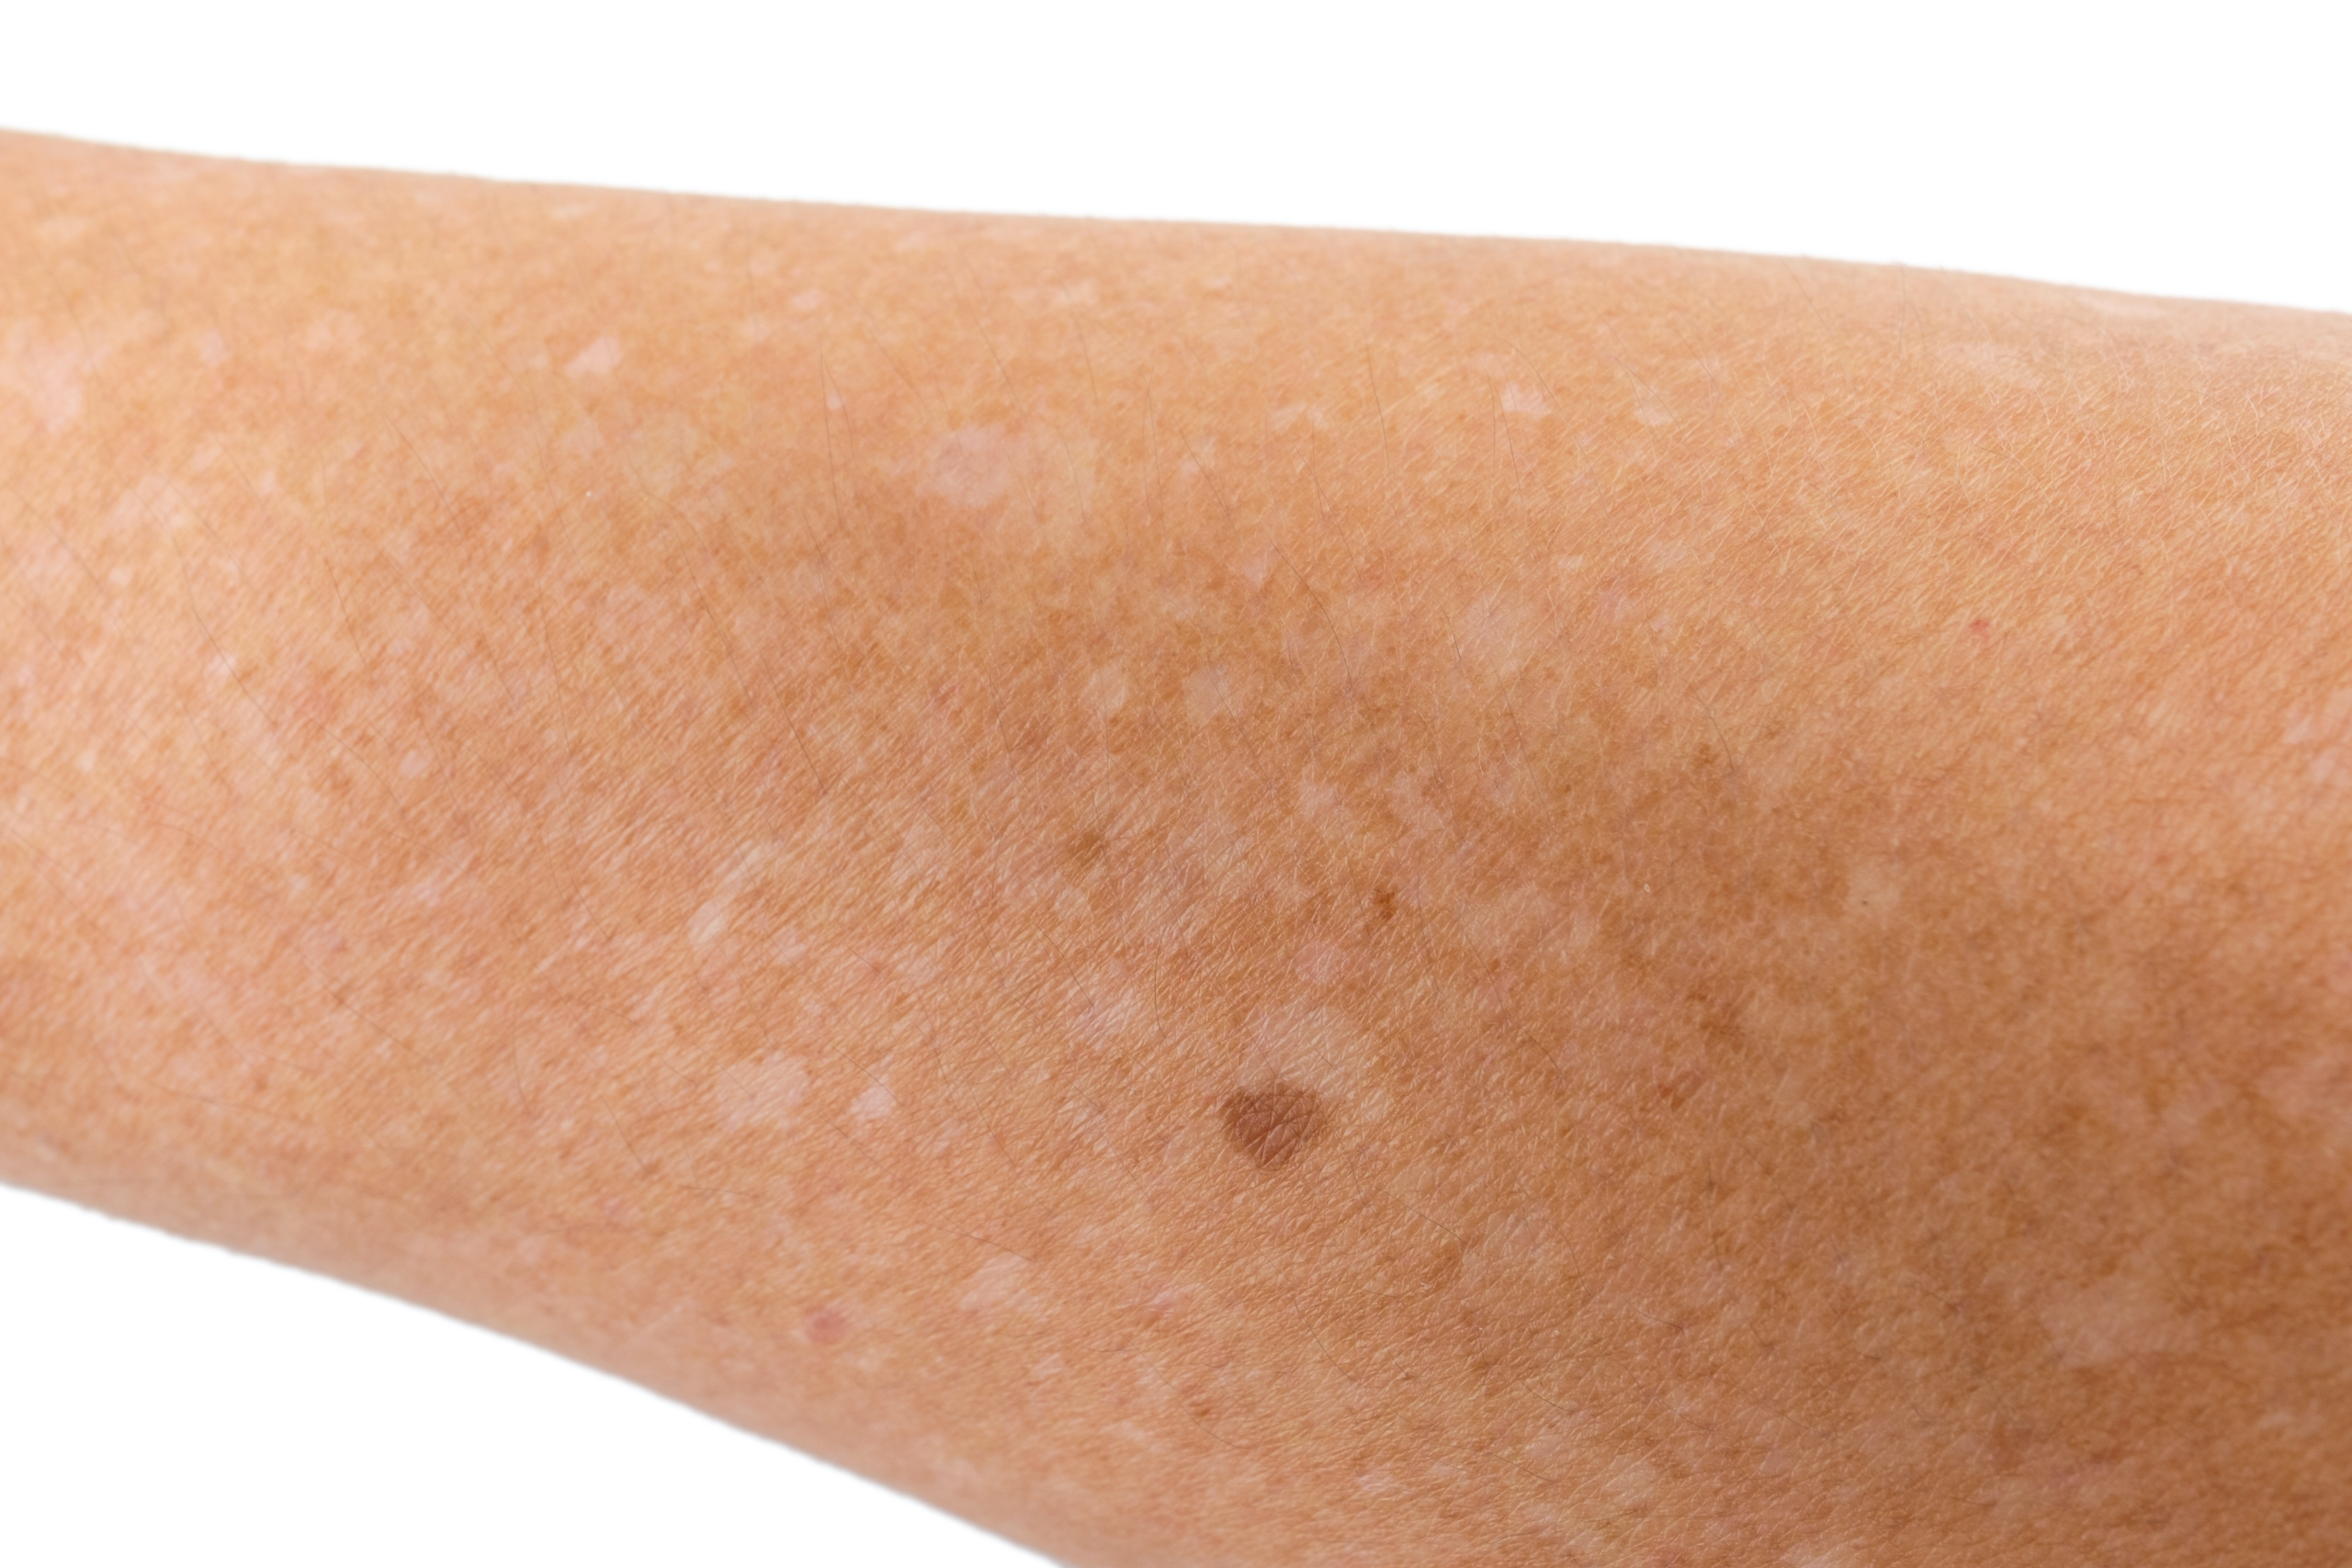 Which Vitamin Deficiency Causes White Spots on Skin? - The Derm